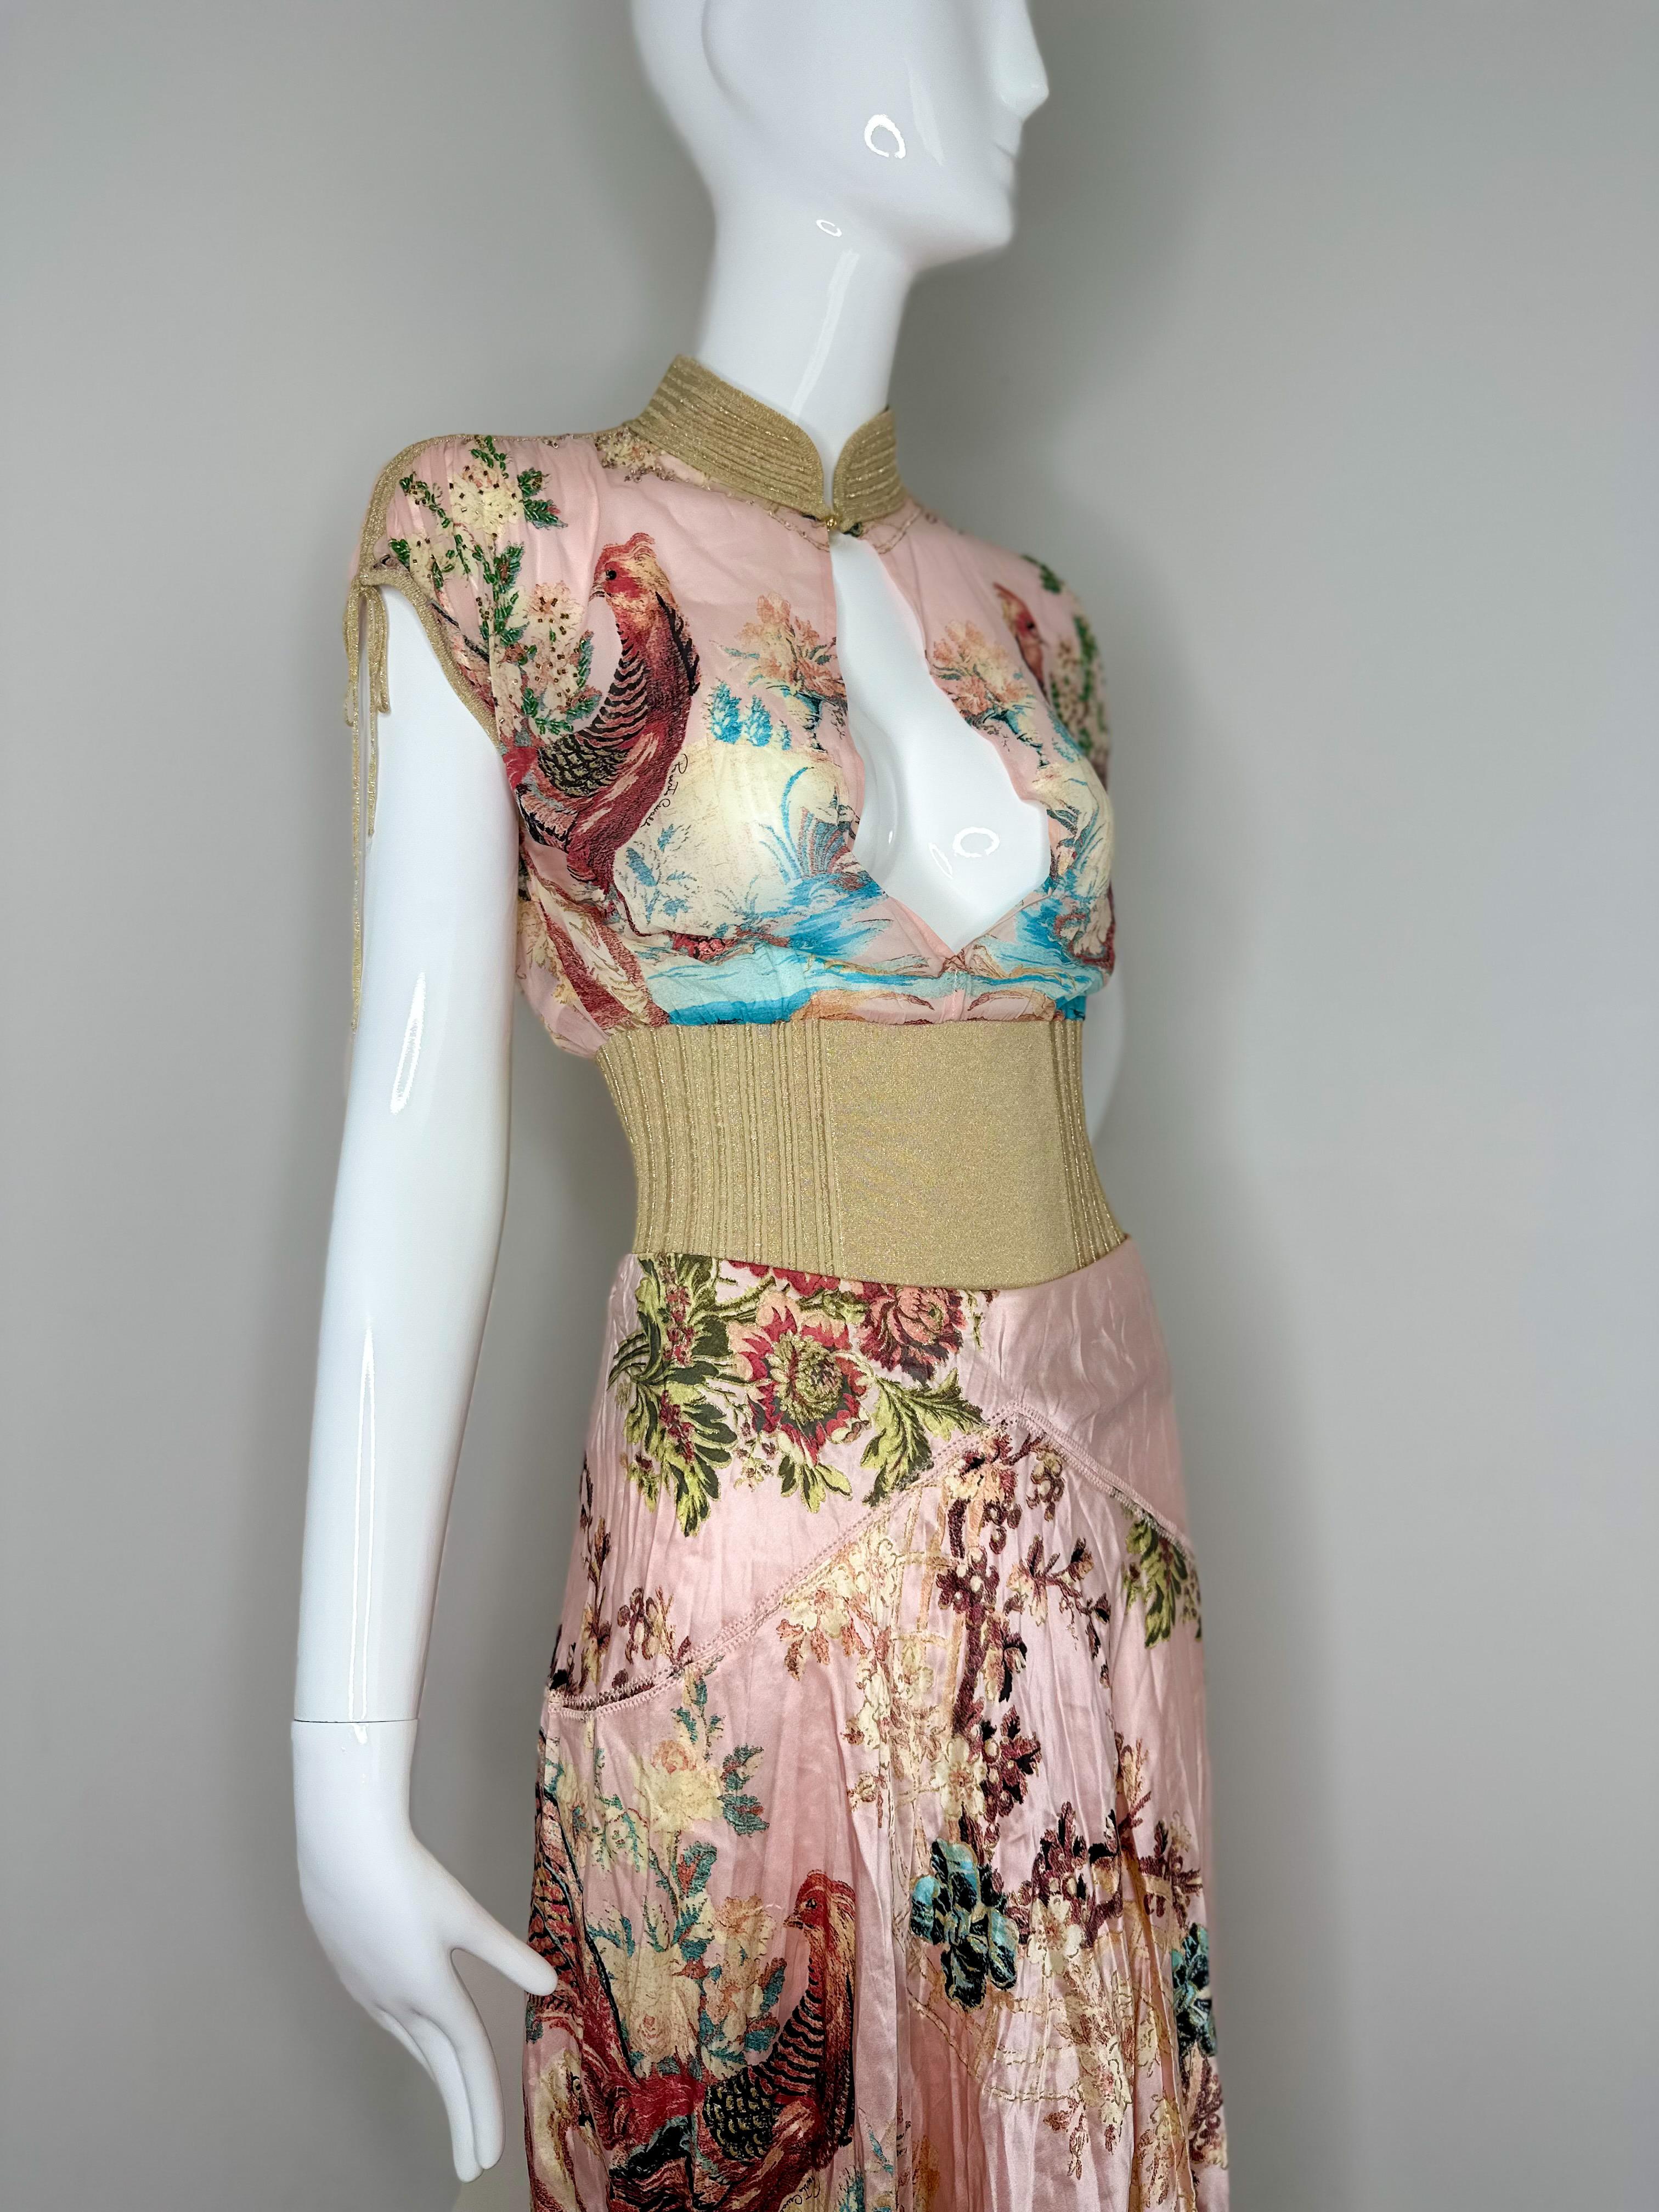 Roberto Cavalli 2003 silk pheasant skirt and top In Good Condition For Sale In Annandale, VA